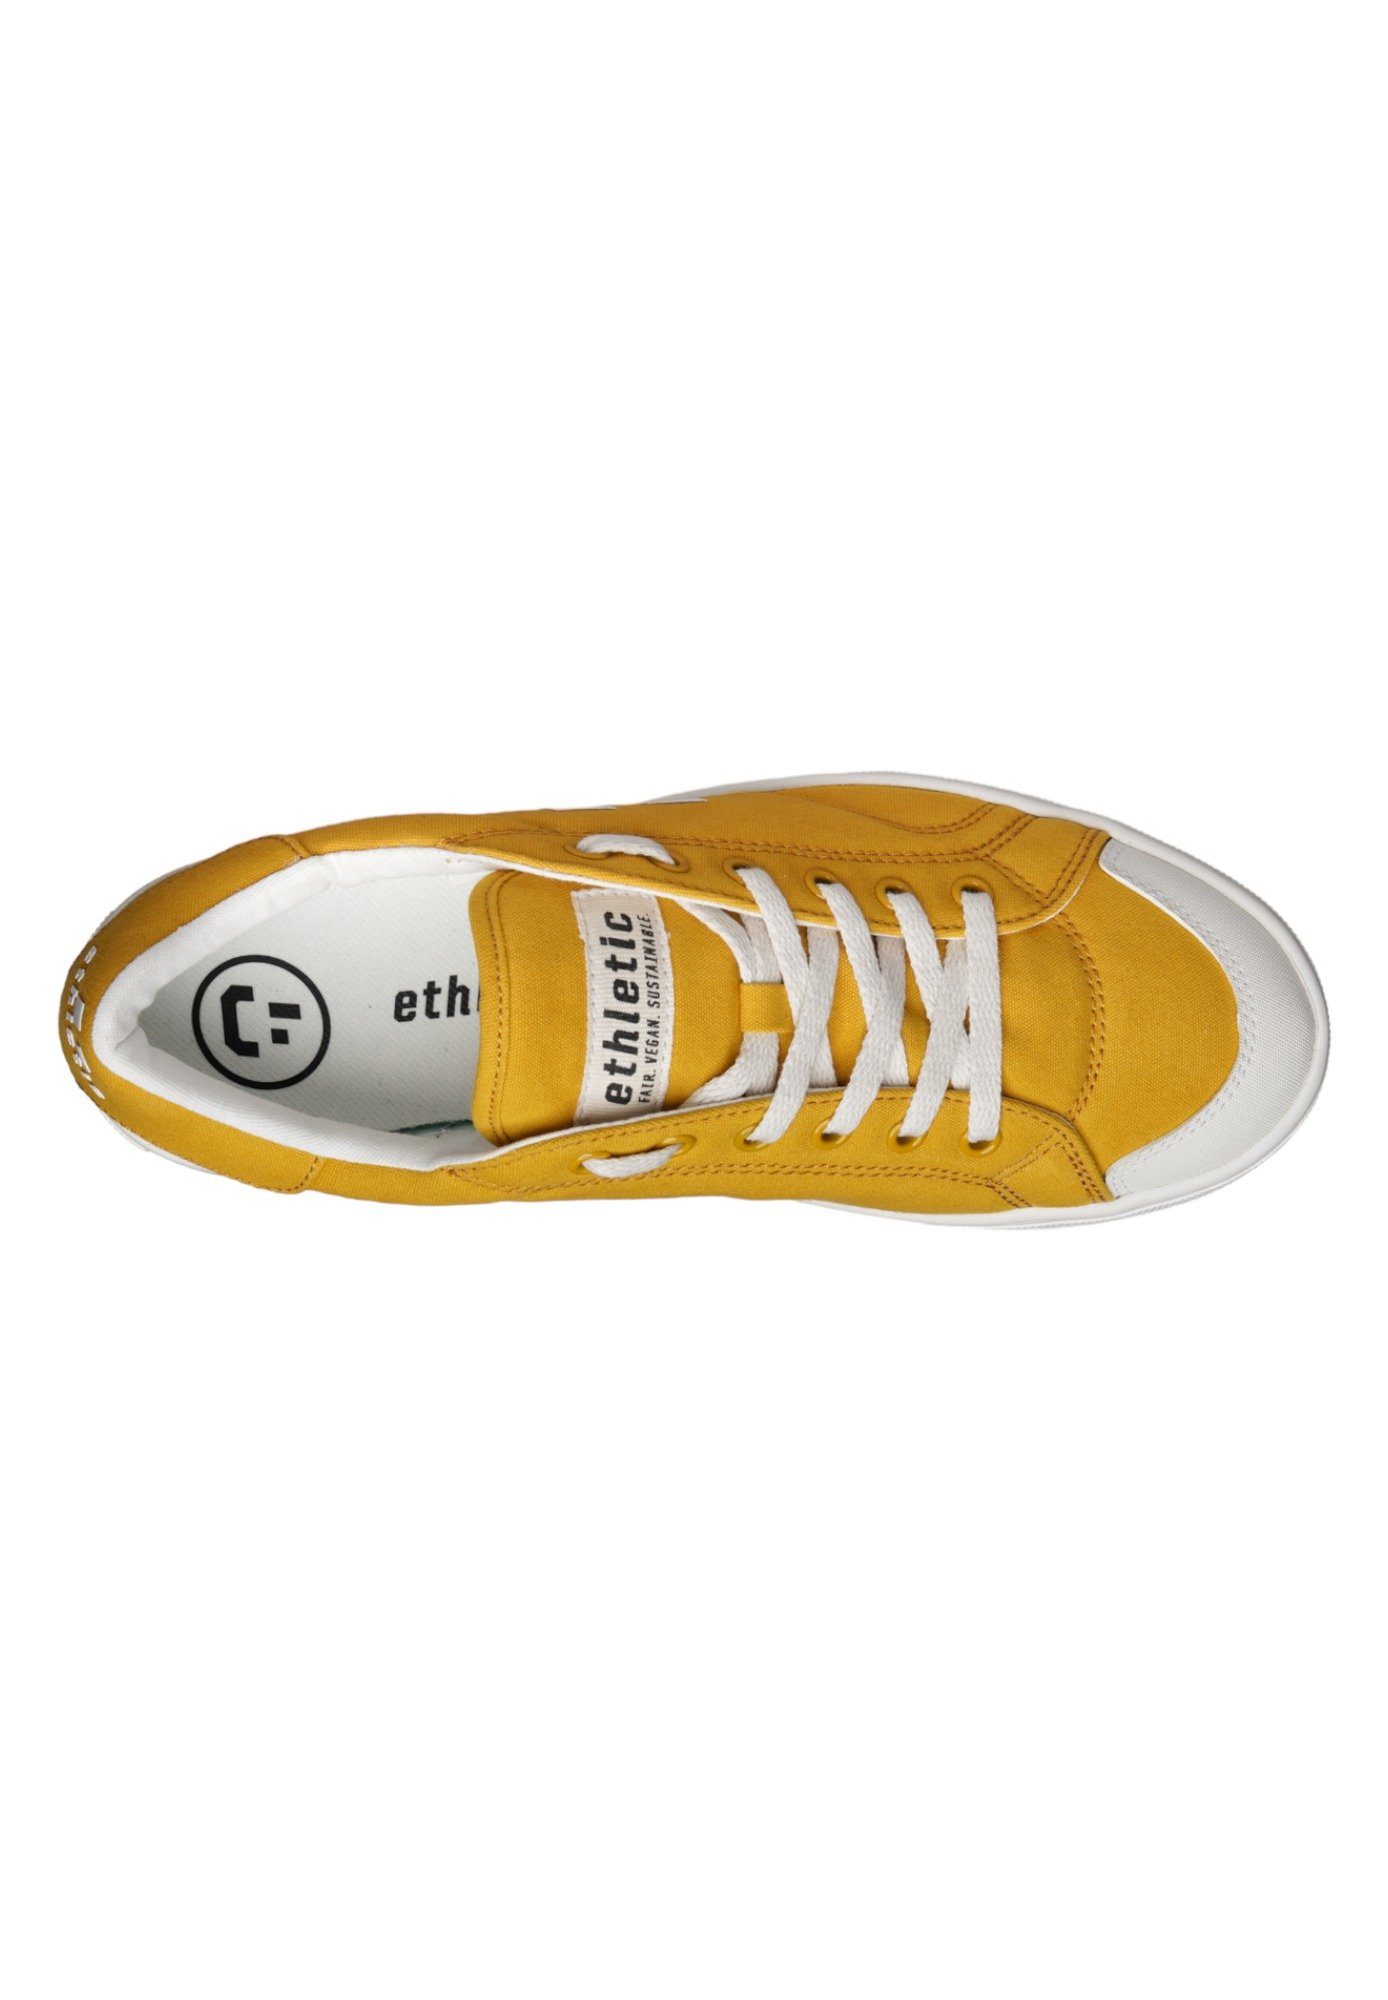 ETHLETIC Sneaker Yellow - Active Fairtrade Cut Mustard Produkt Just White Lo